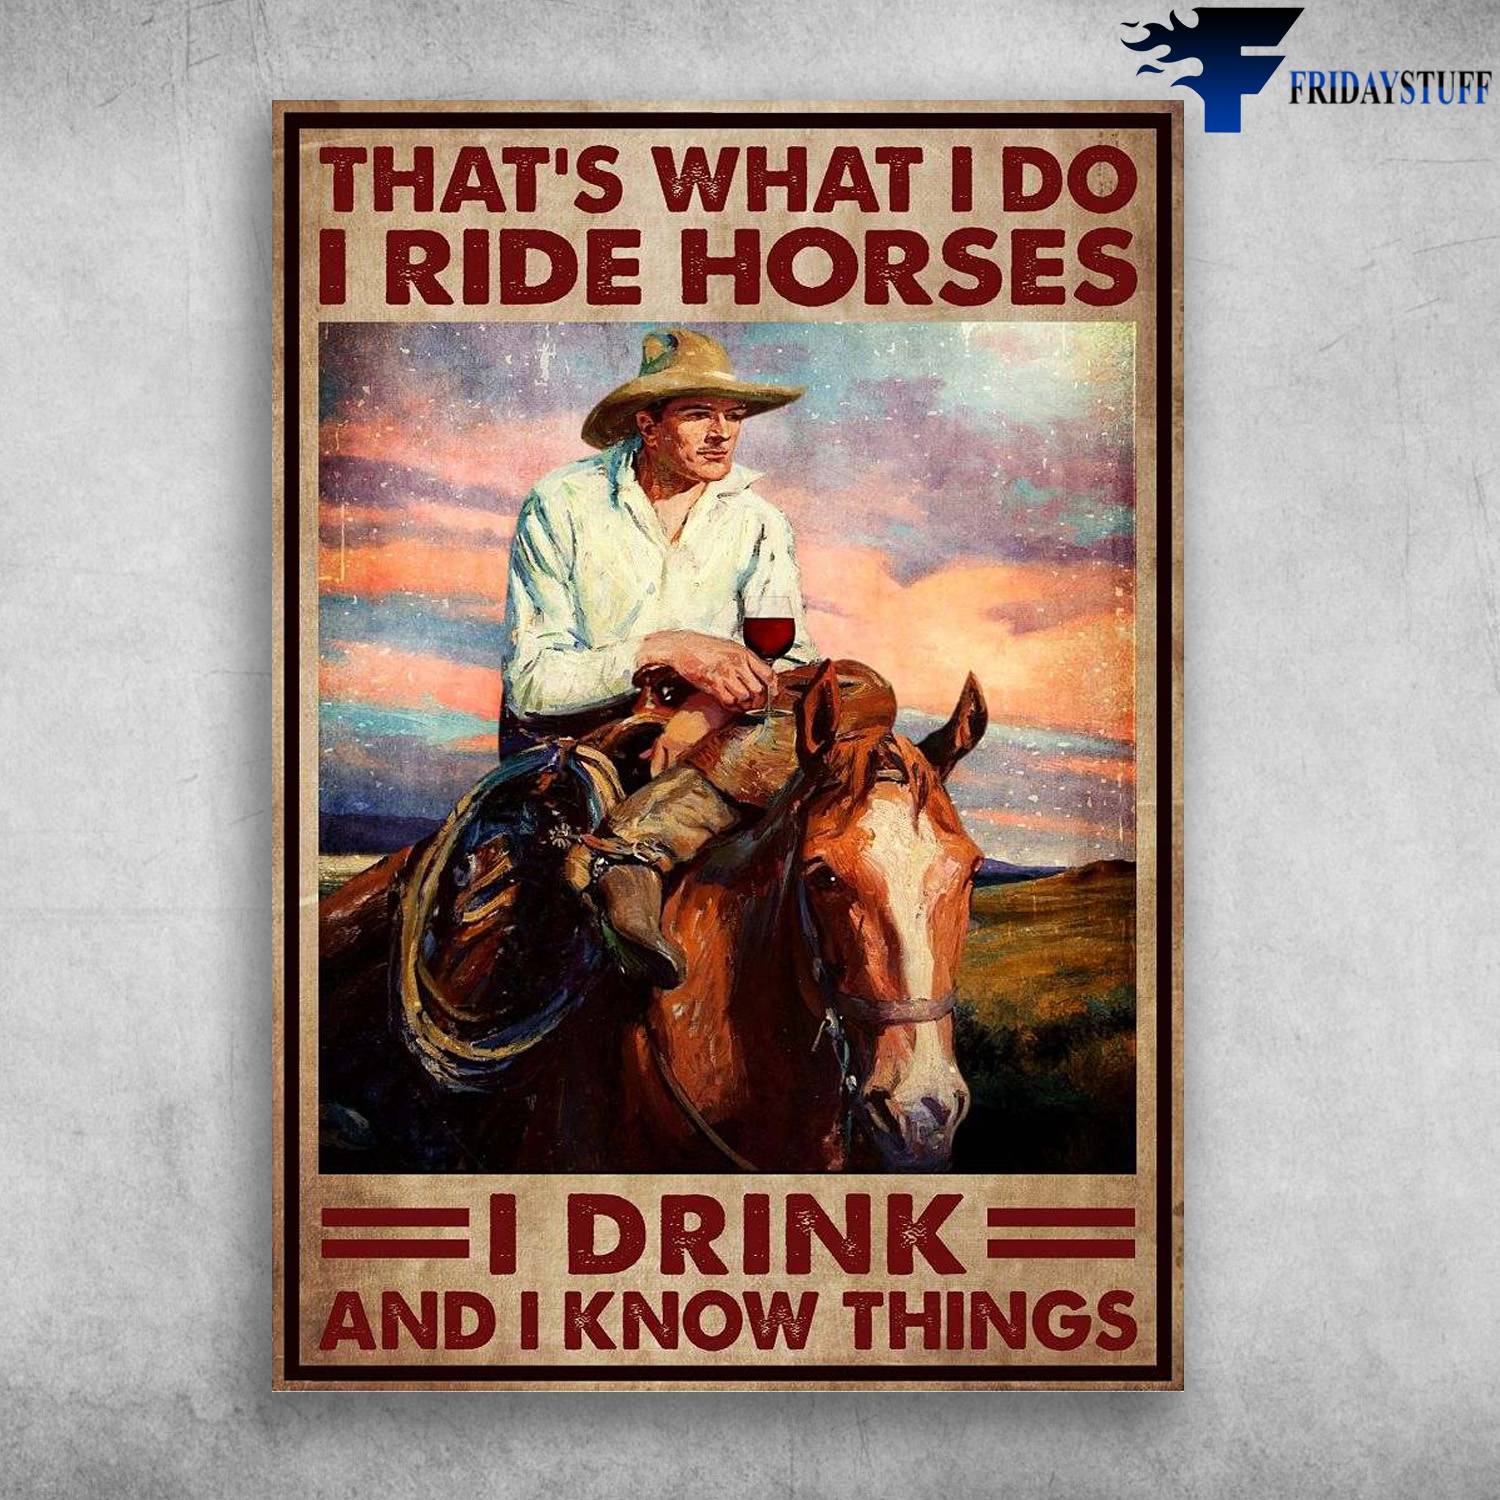 Cowboy Riding Horse - That's What I Do, I Ride Horses, I Drink, And I Know Things